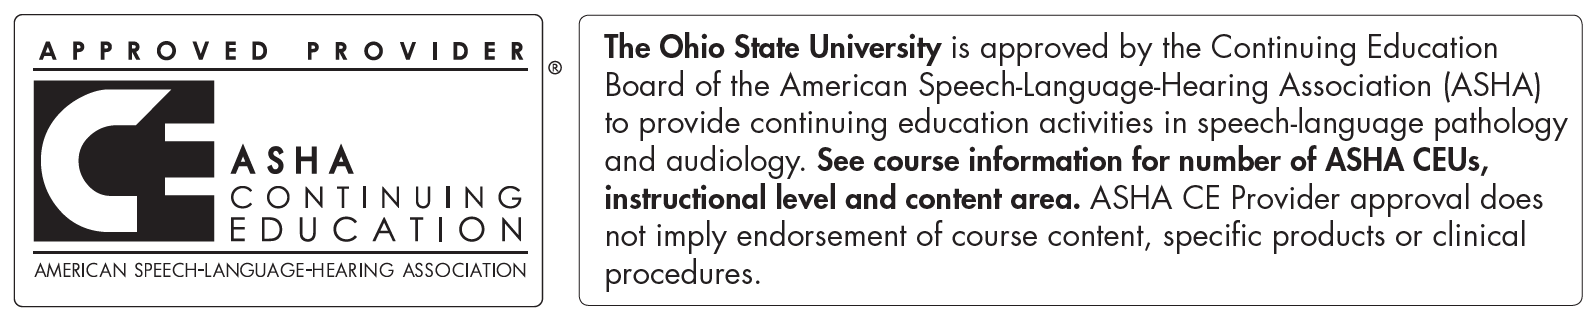 The Ohio State University is approved by the Continuing Education Board of the American Speech-Language-Hearing Association to provide continuing education activities in speech-language pathology and audiology.